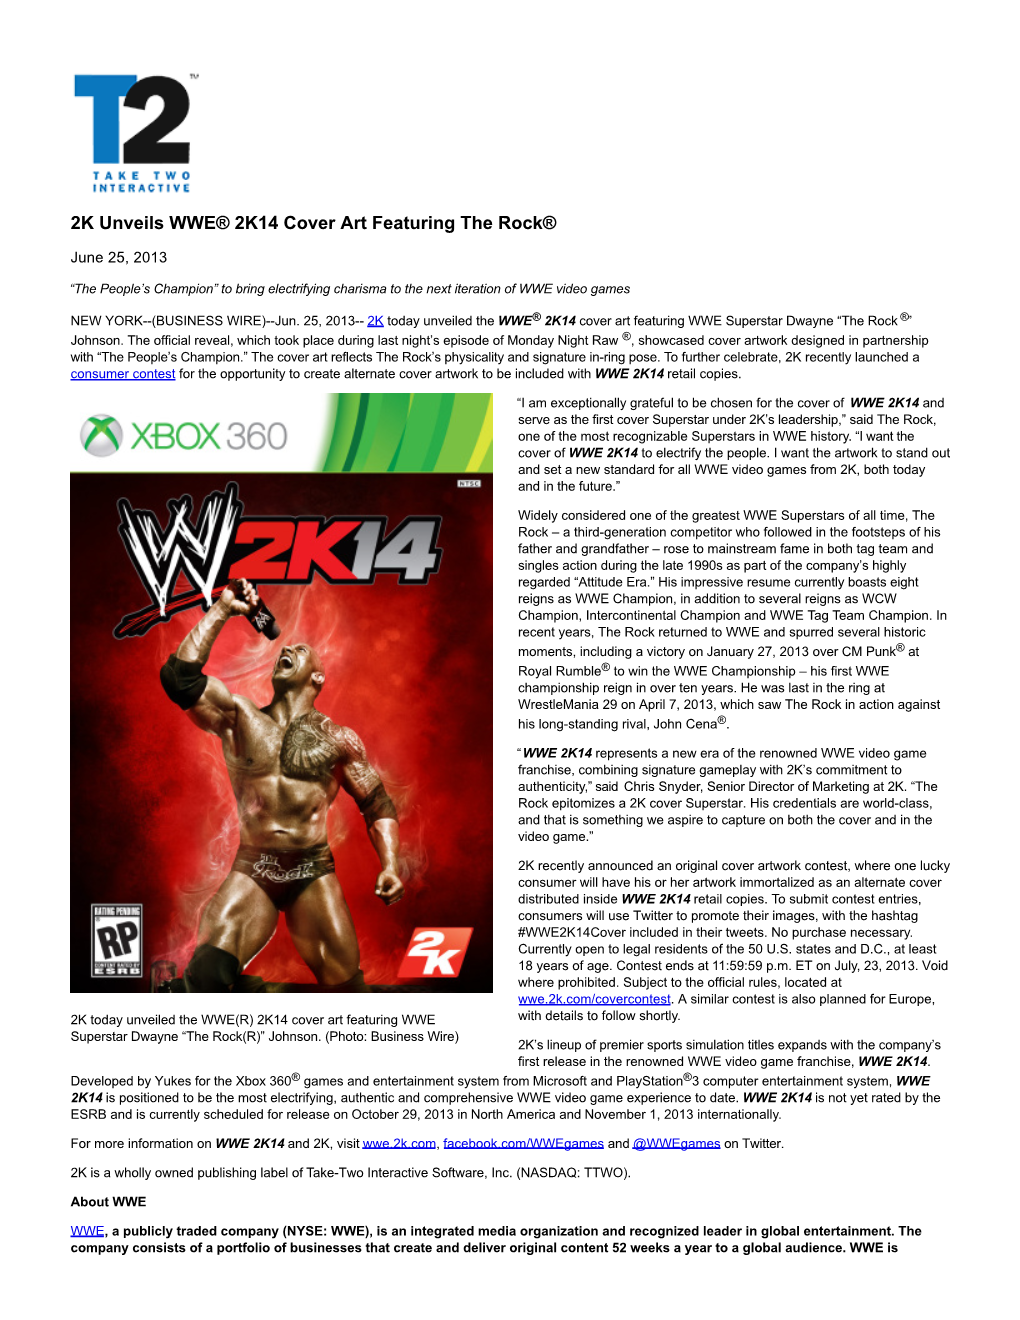 2K Unveils WWE® 2K14 Cover Art Featuring the Rock®